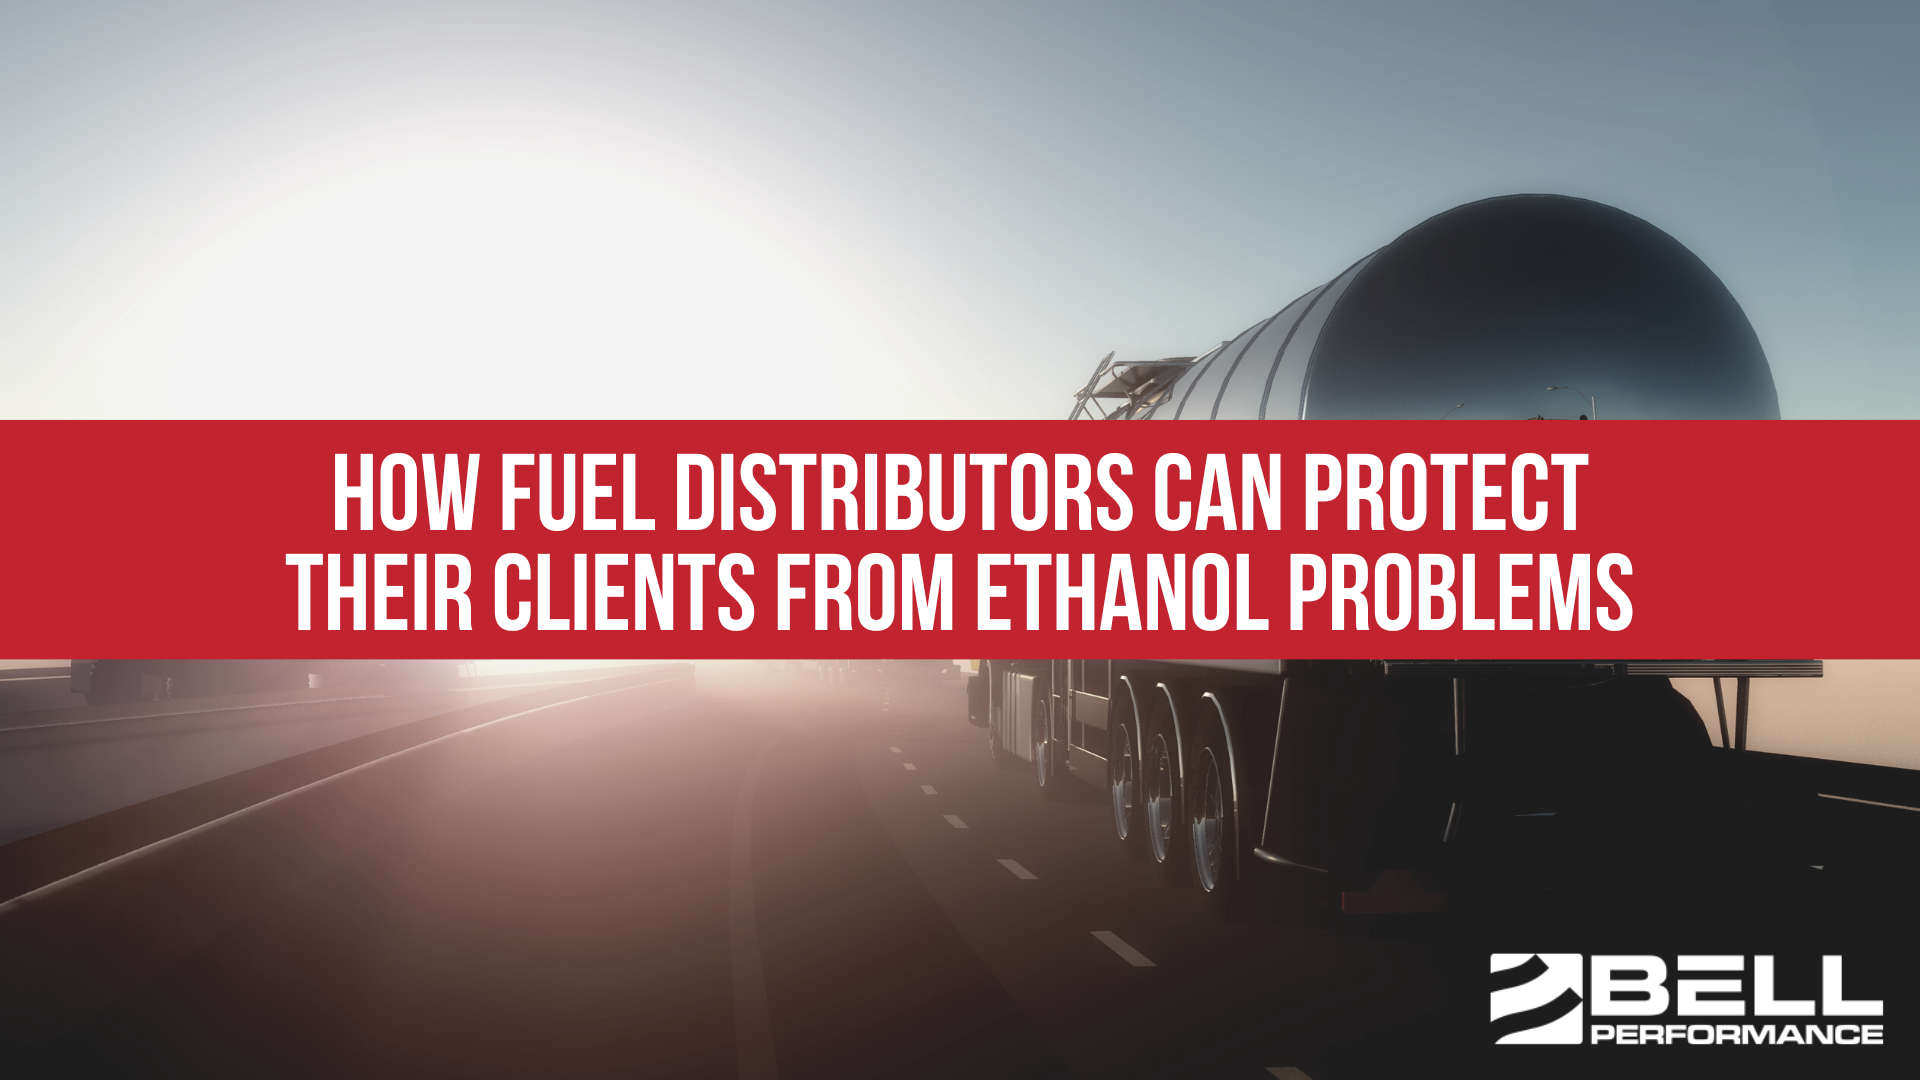 How Fuel Distributors Can Protect Their Clients From Ethanol Problems